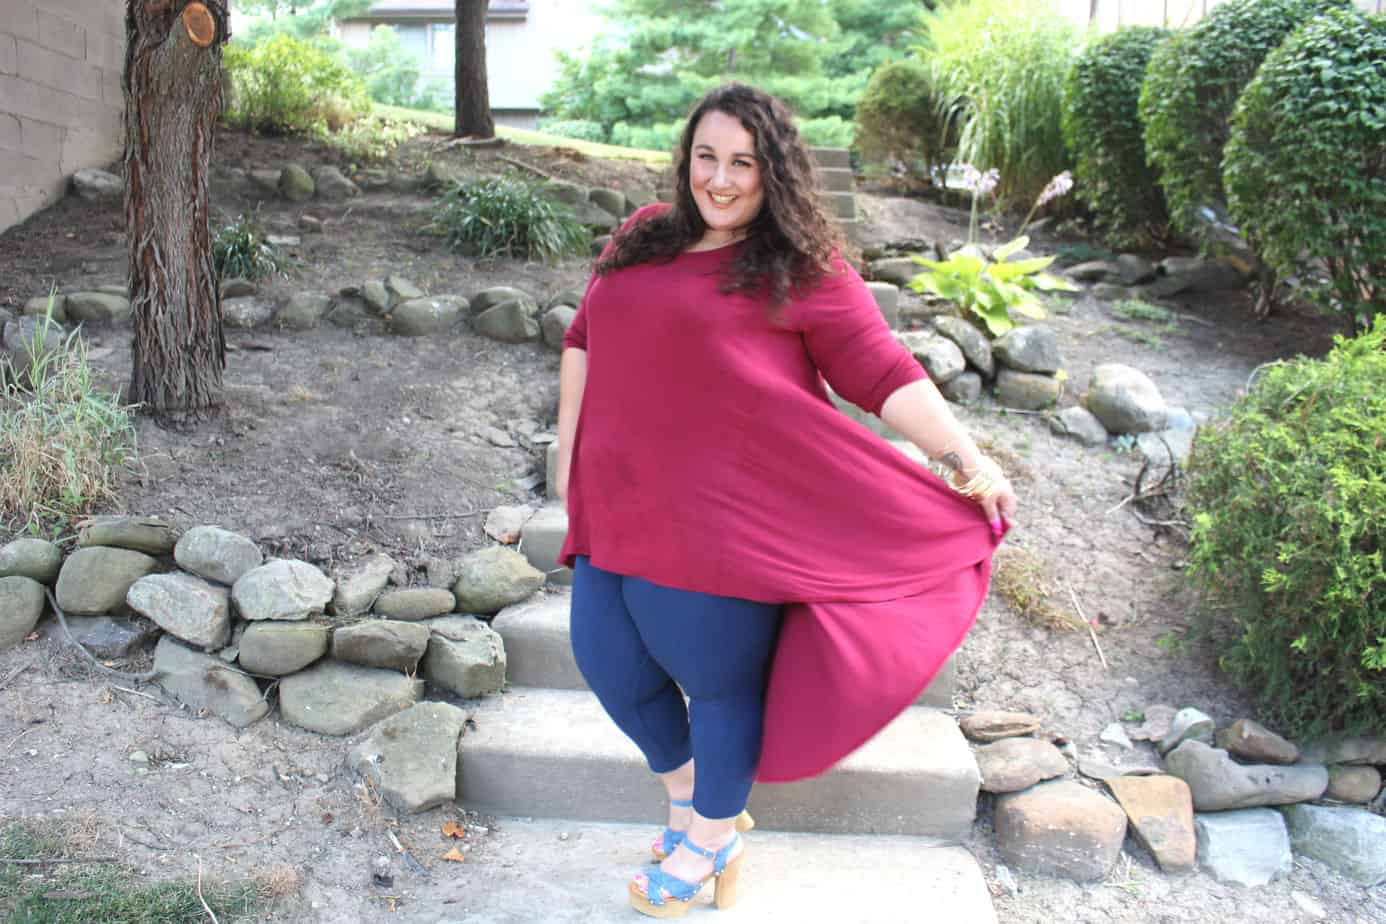 Transitioning Summer Plus Size Fashion for Fall - Ready To Stare